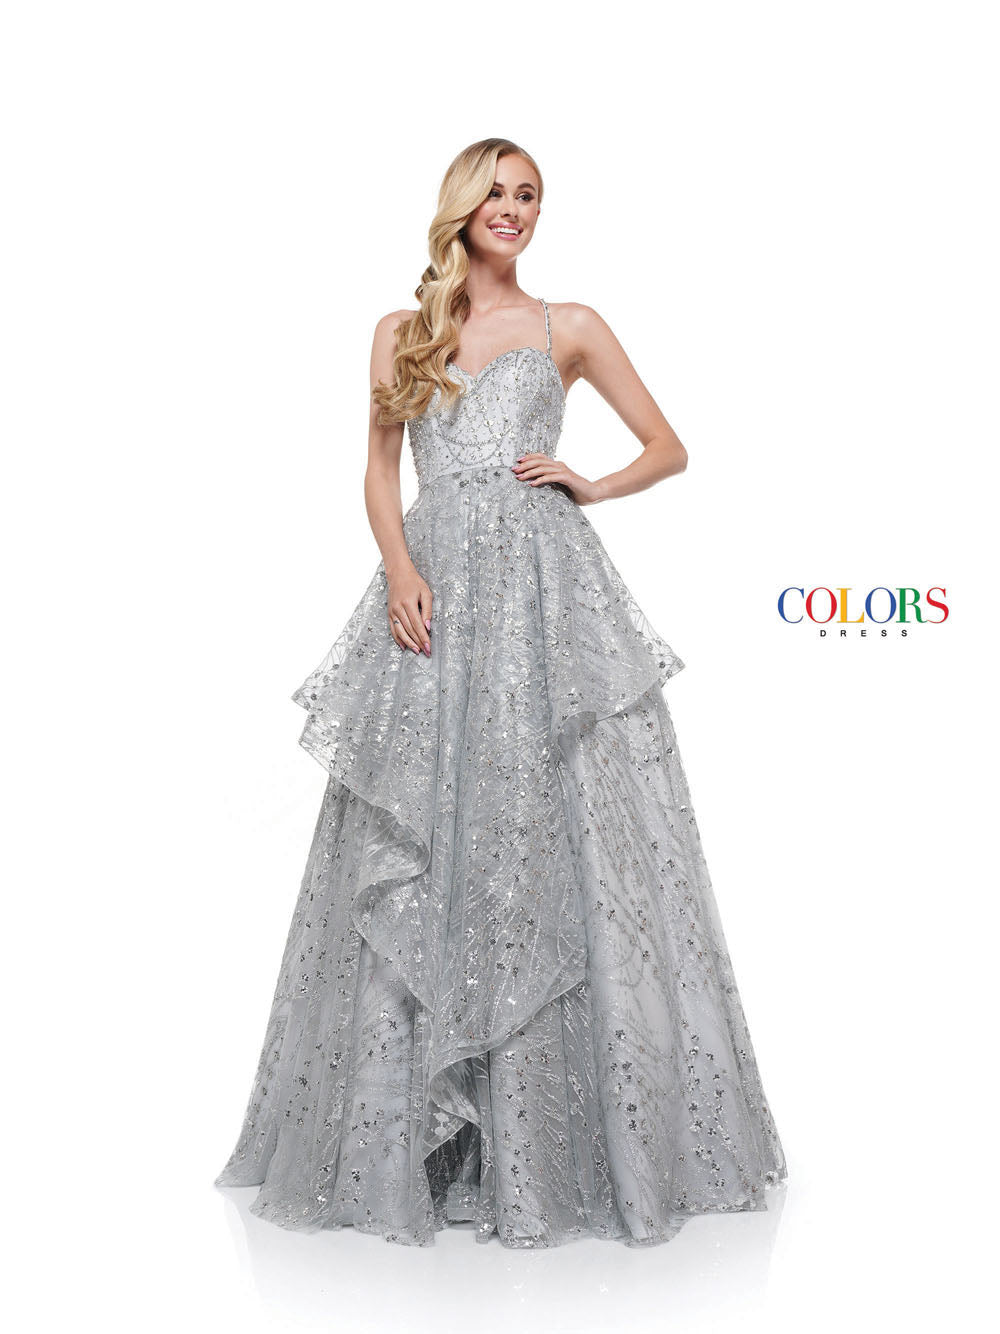 Silver Stunners by Colors Dress